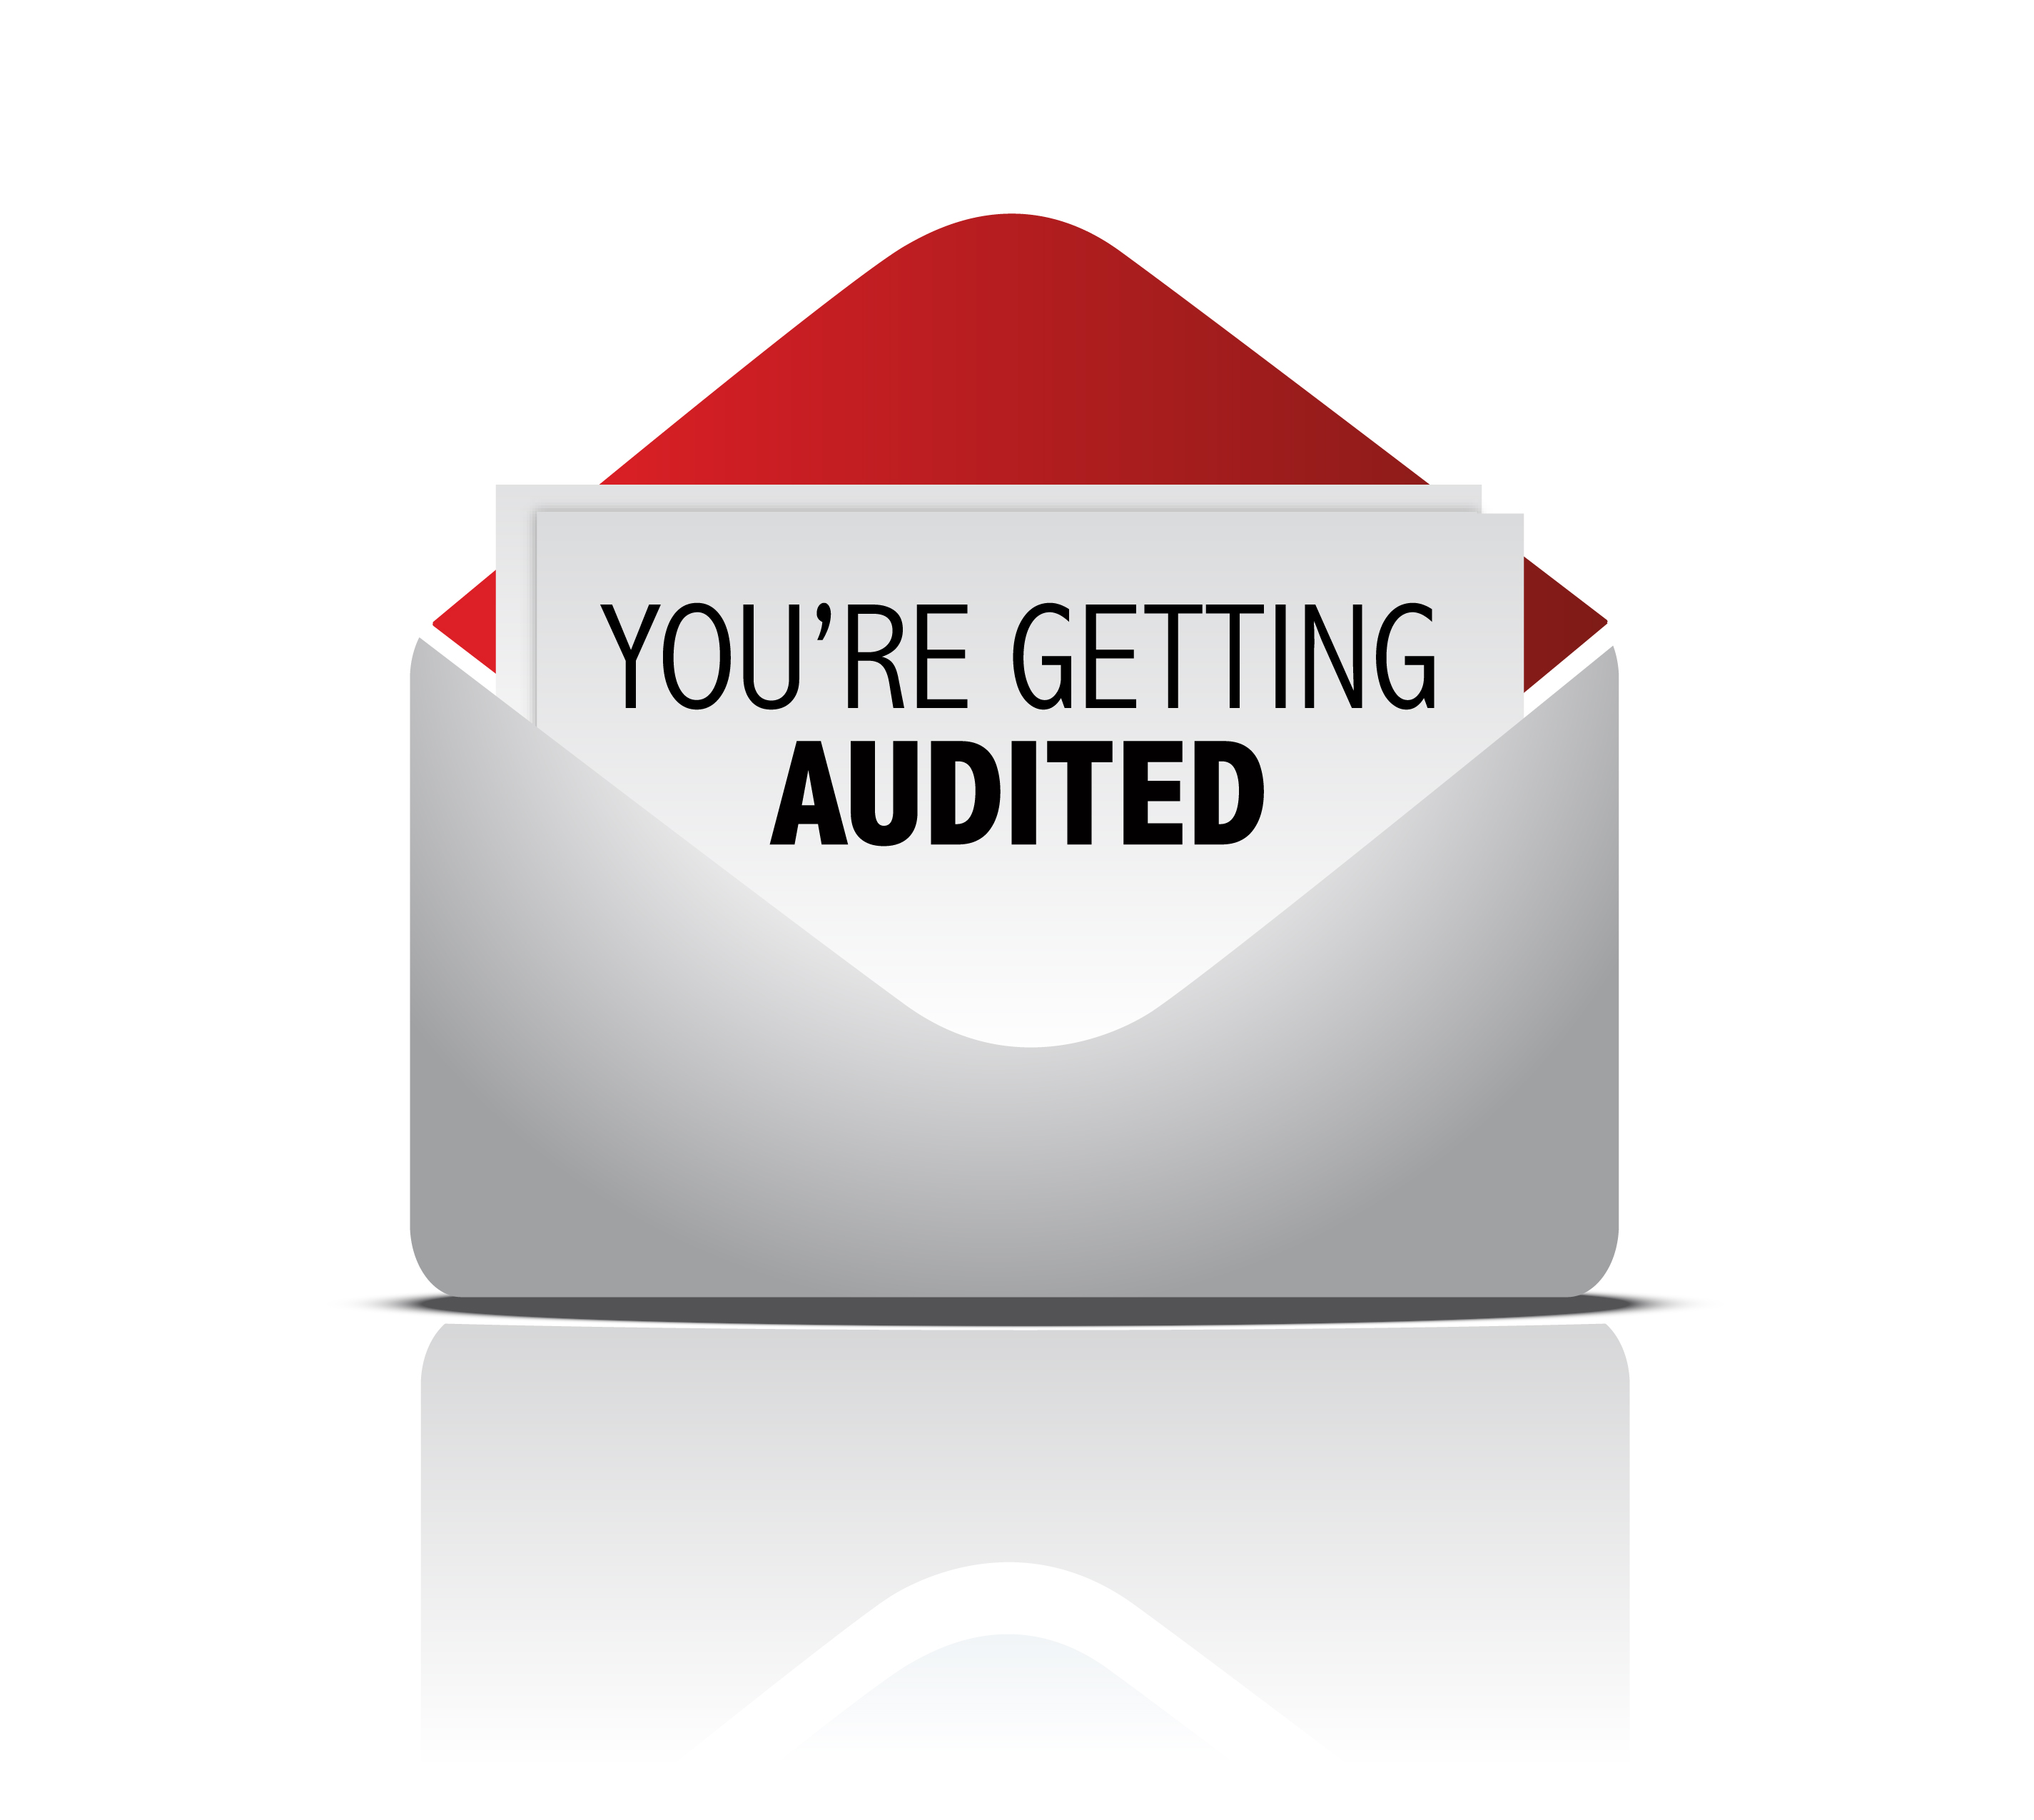 You are getting audited